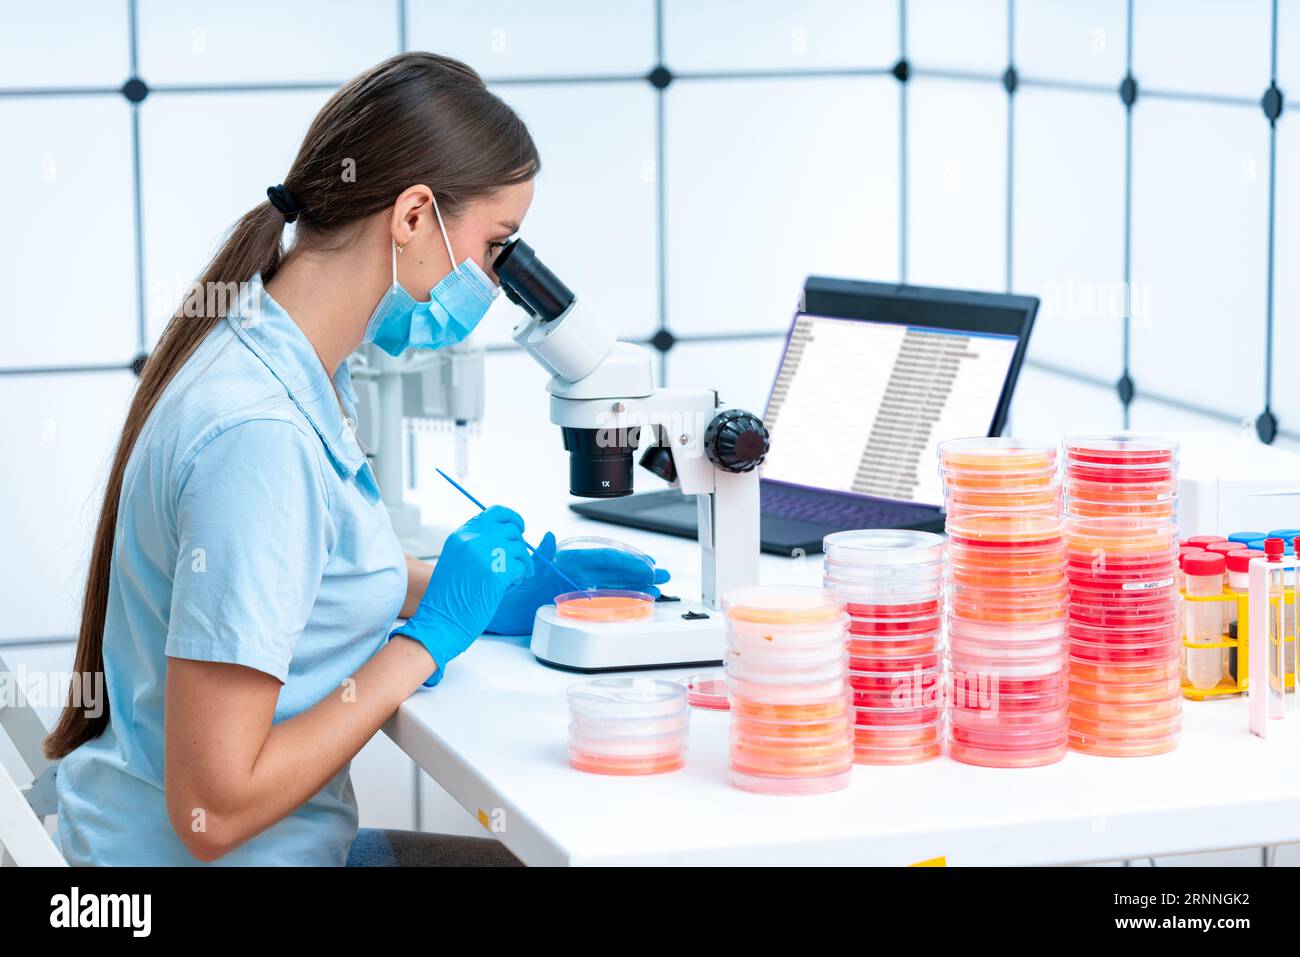 Recombinant DNA technology: Petri dishes are employed in various recombinant DNA techniques, including DNA cloning, DNA ligation, and DNA transformati Stock Photo